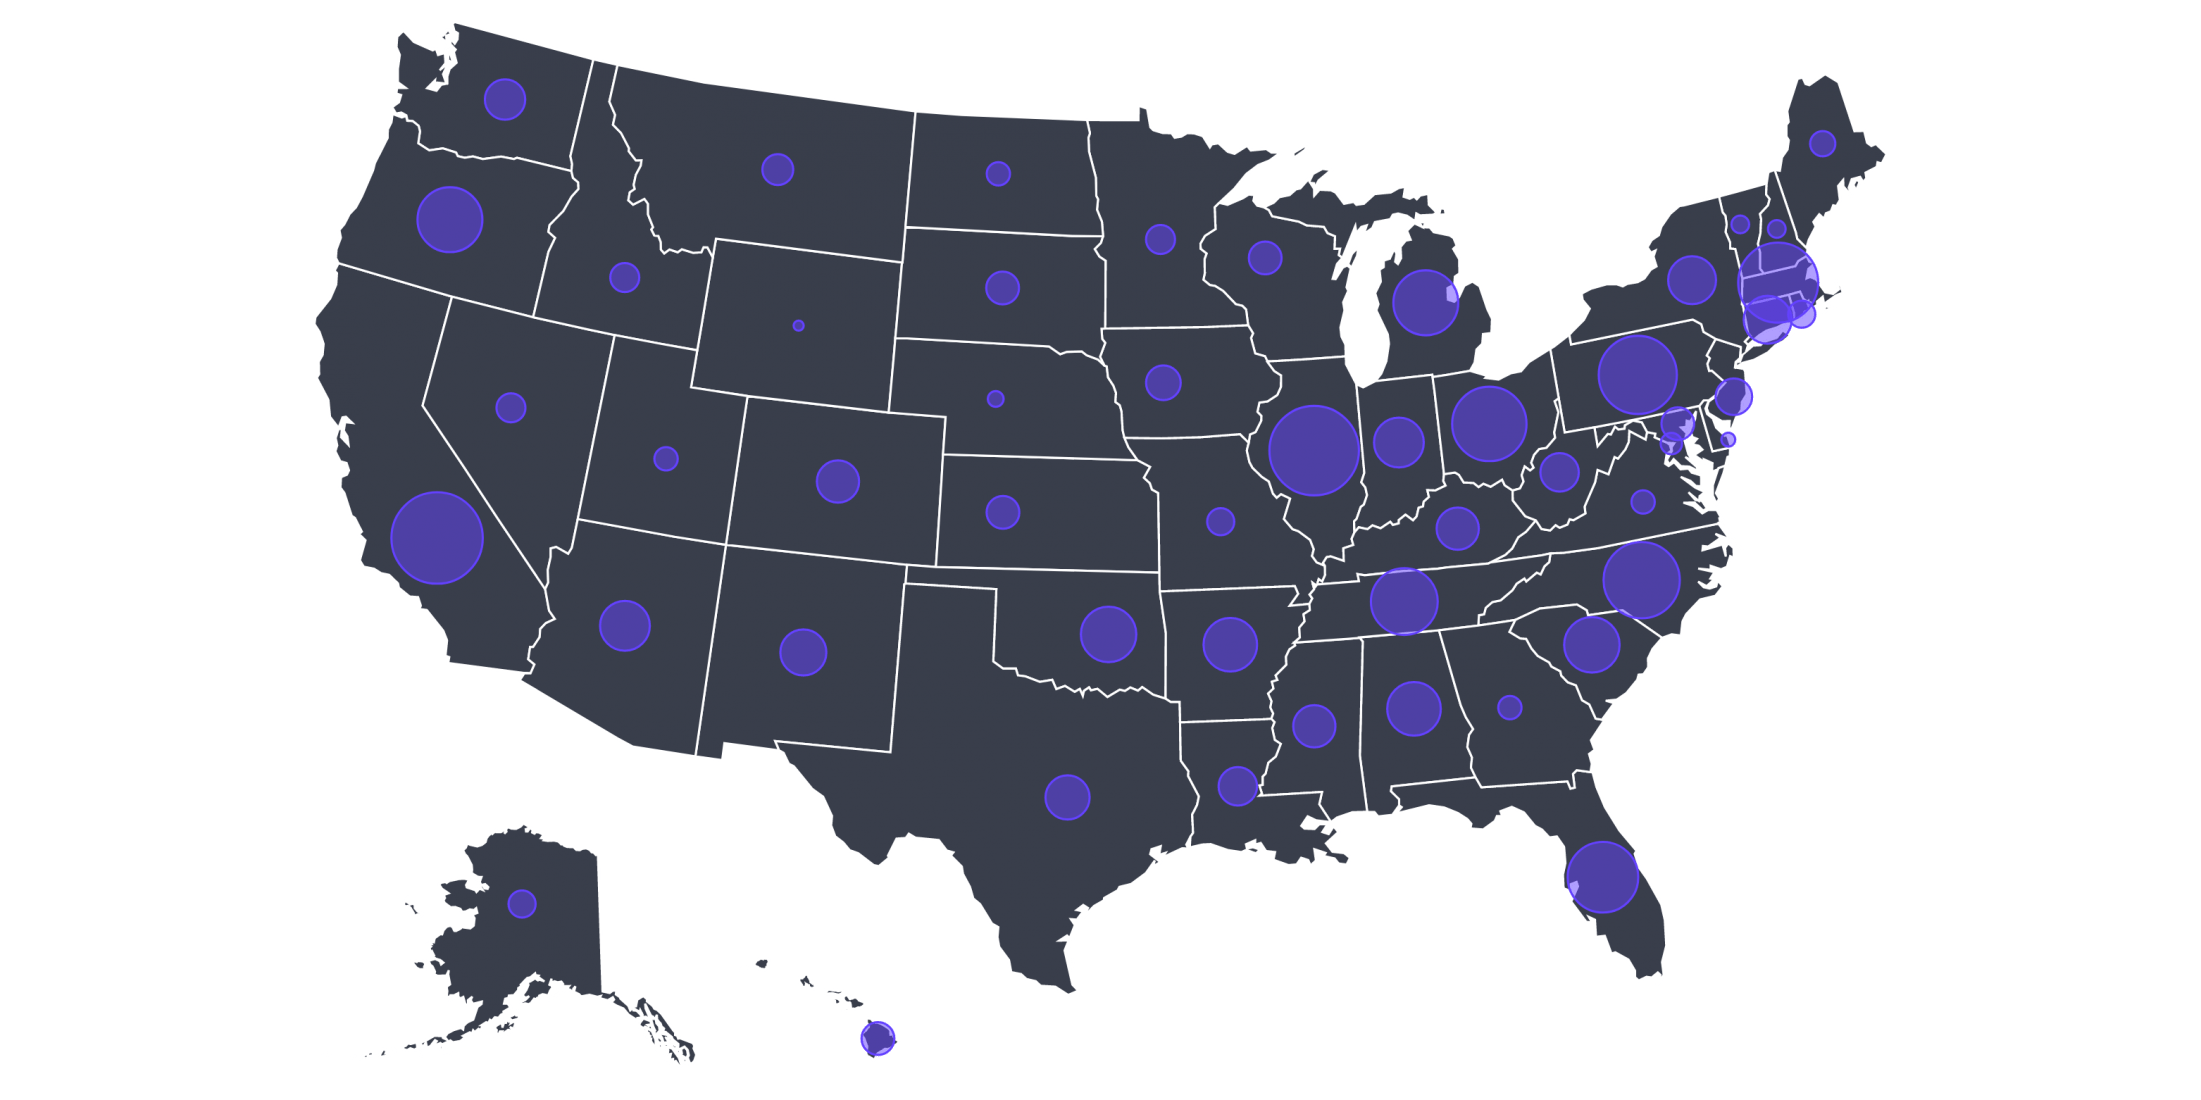 Viewpoints Radio coverage in the United States